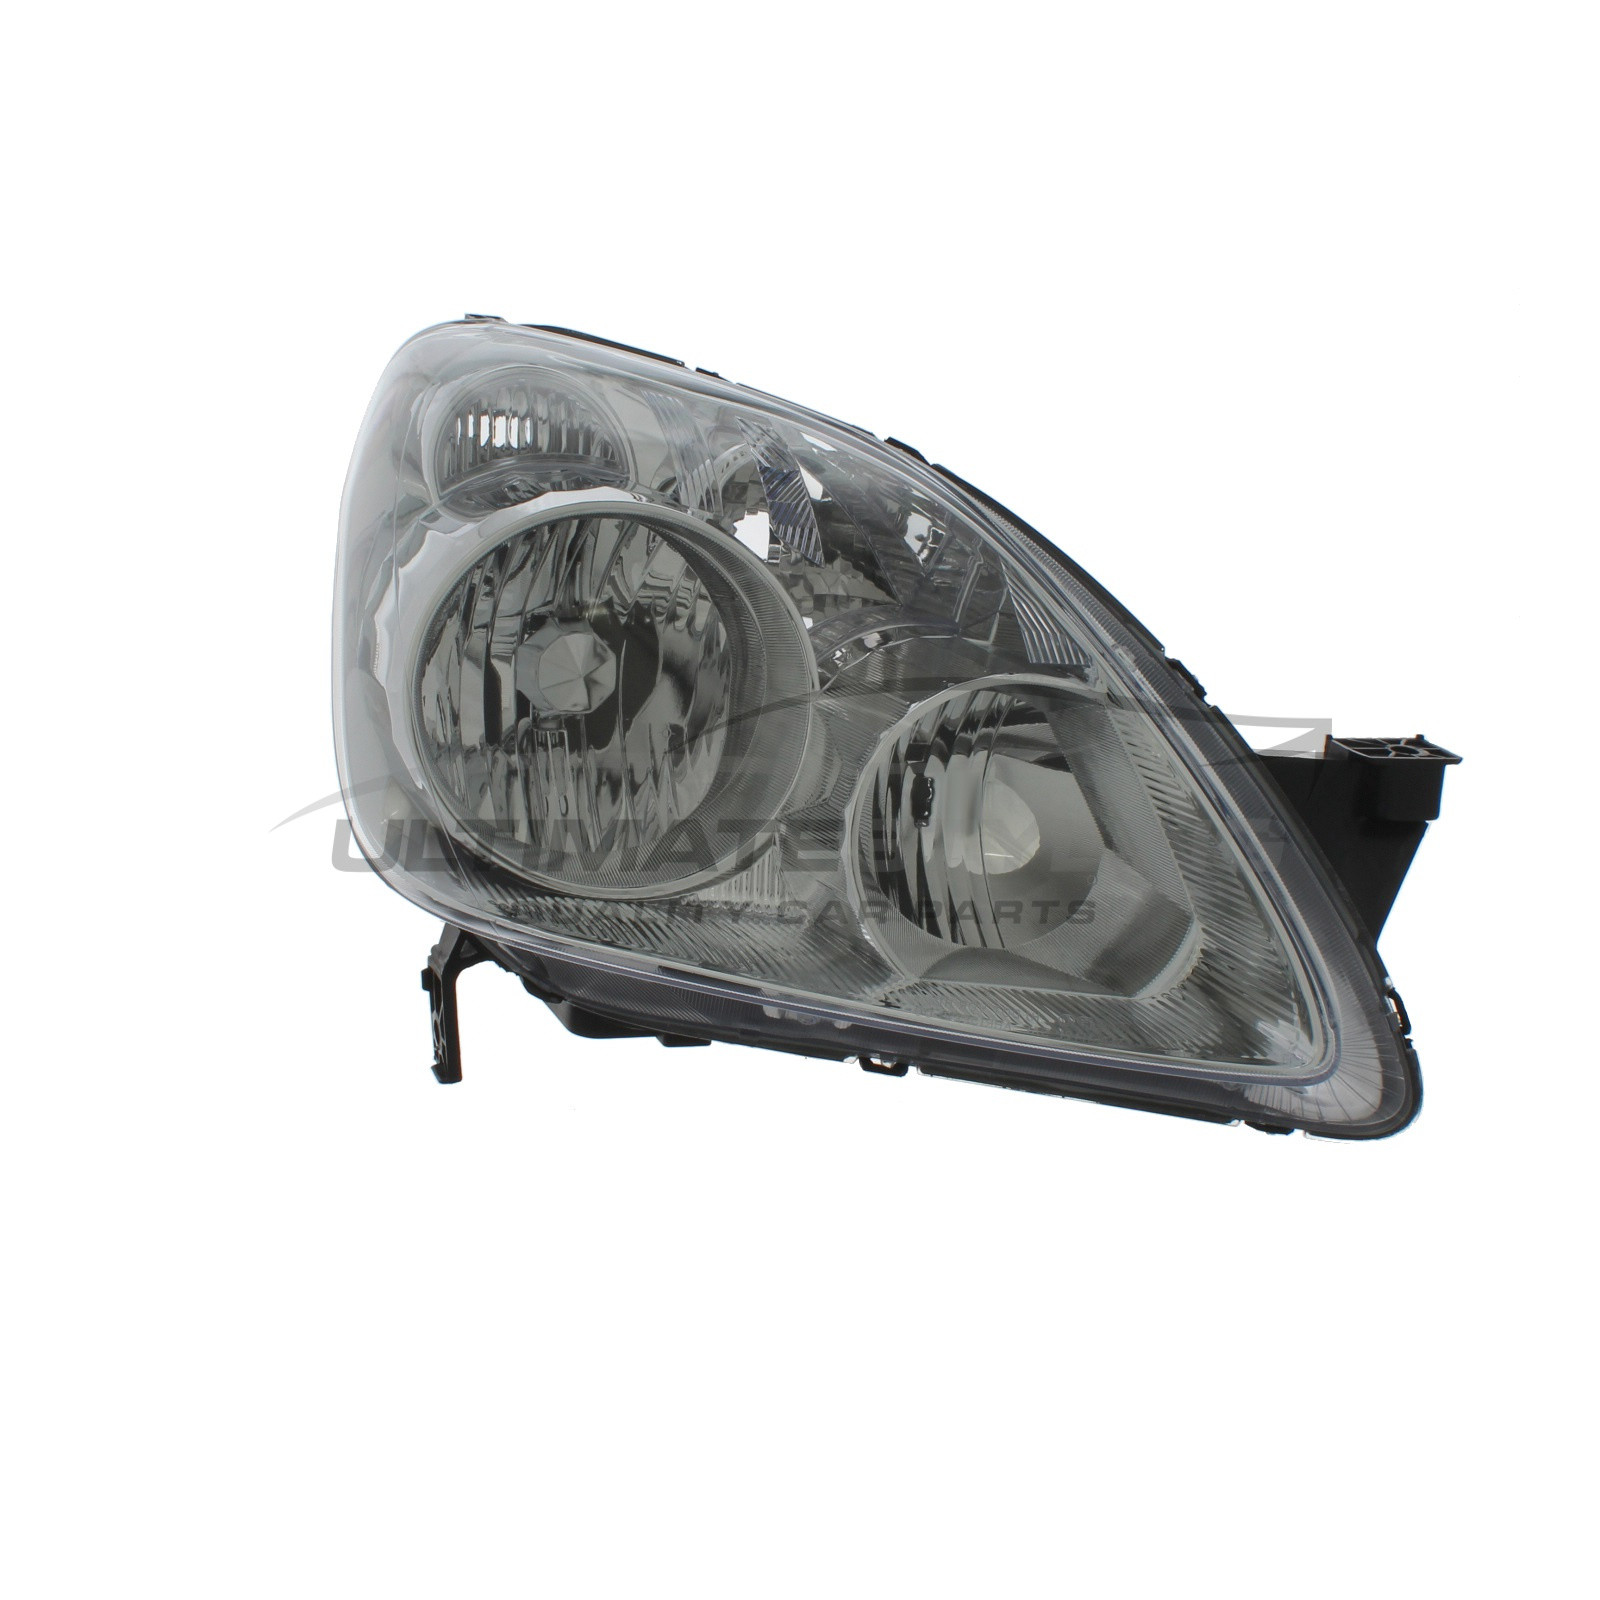 Honda CR-V 2005-2007 Halogen, Electric Without Motor, Chrome Headlight / Headlamp Including Clear Indicator Drivers Side (RH)